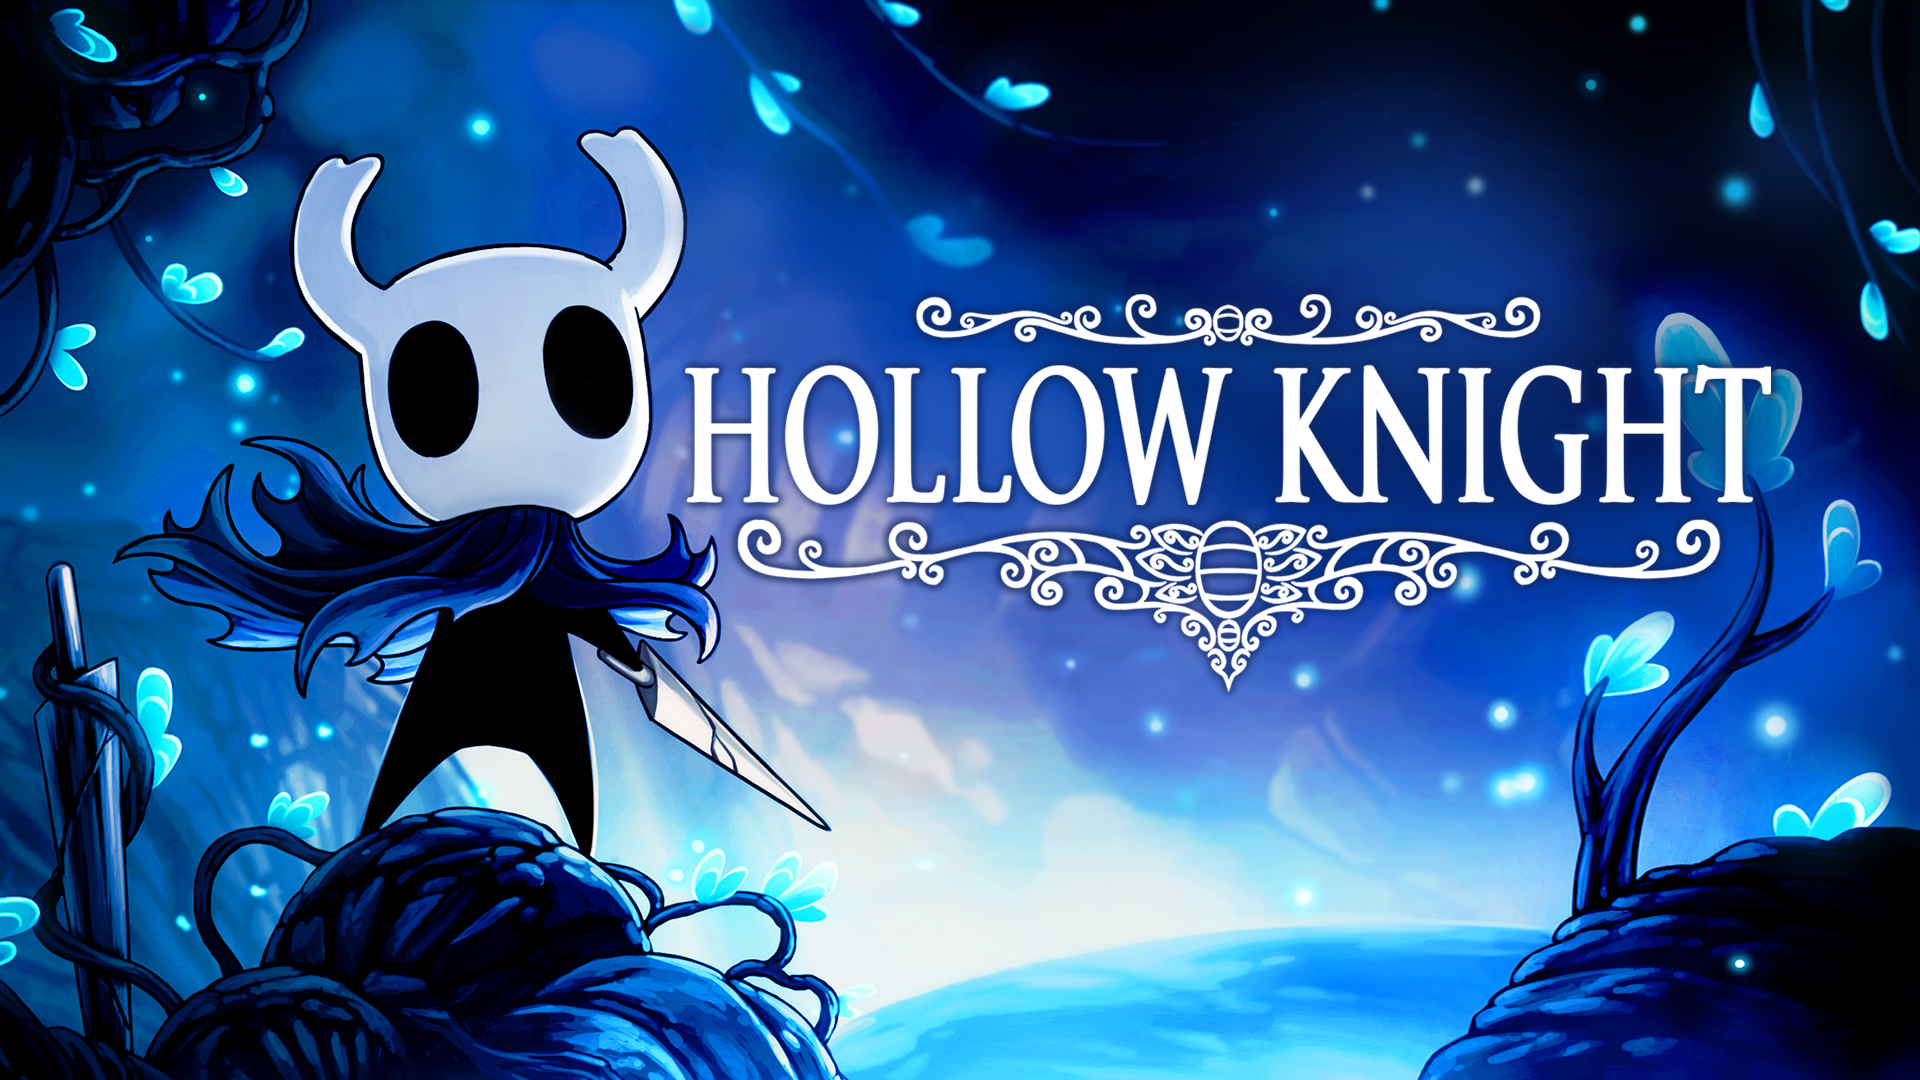 games worth every penny - Hollow Knight